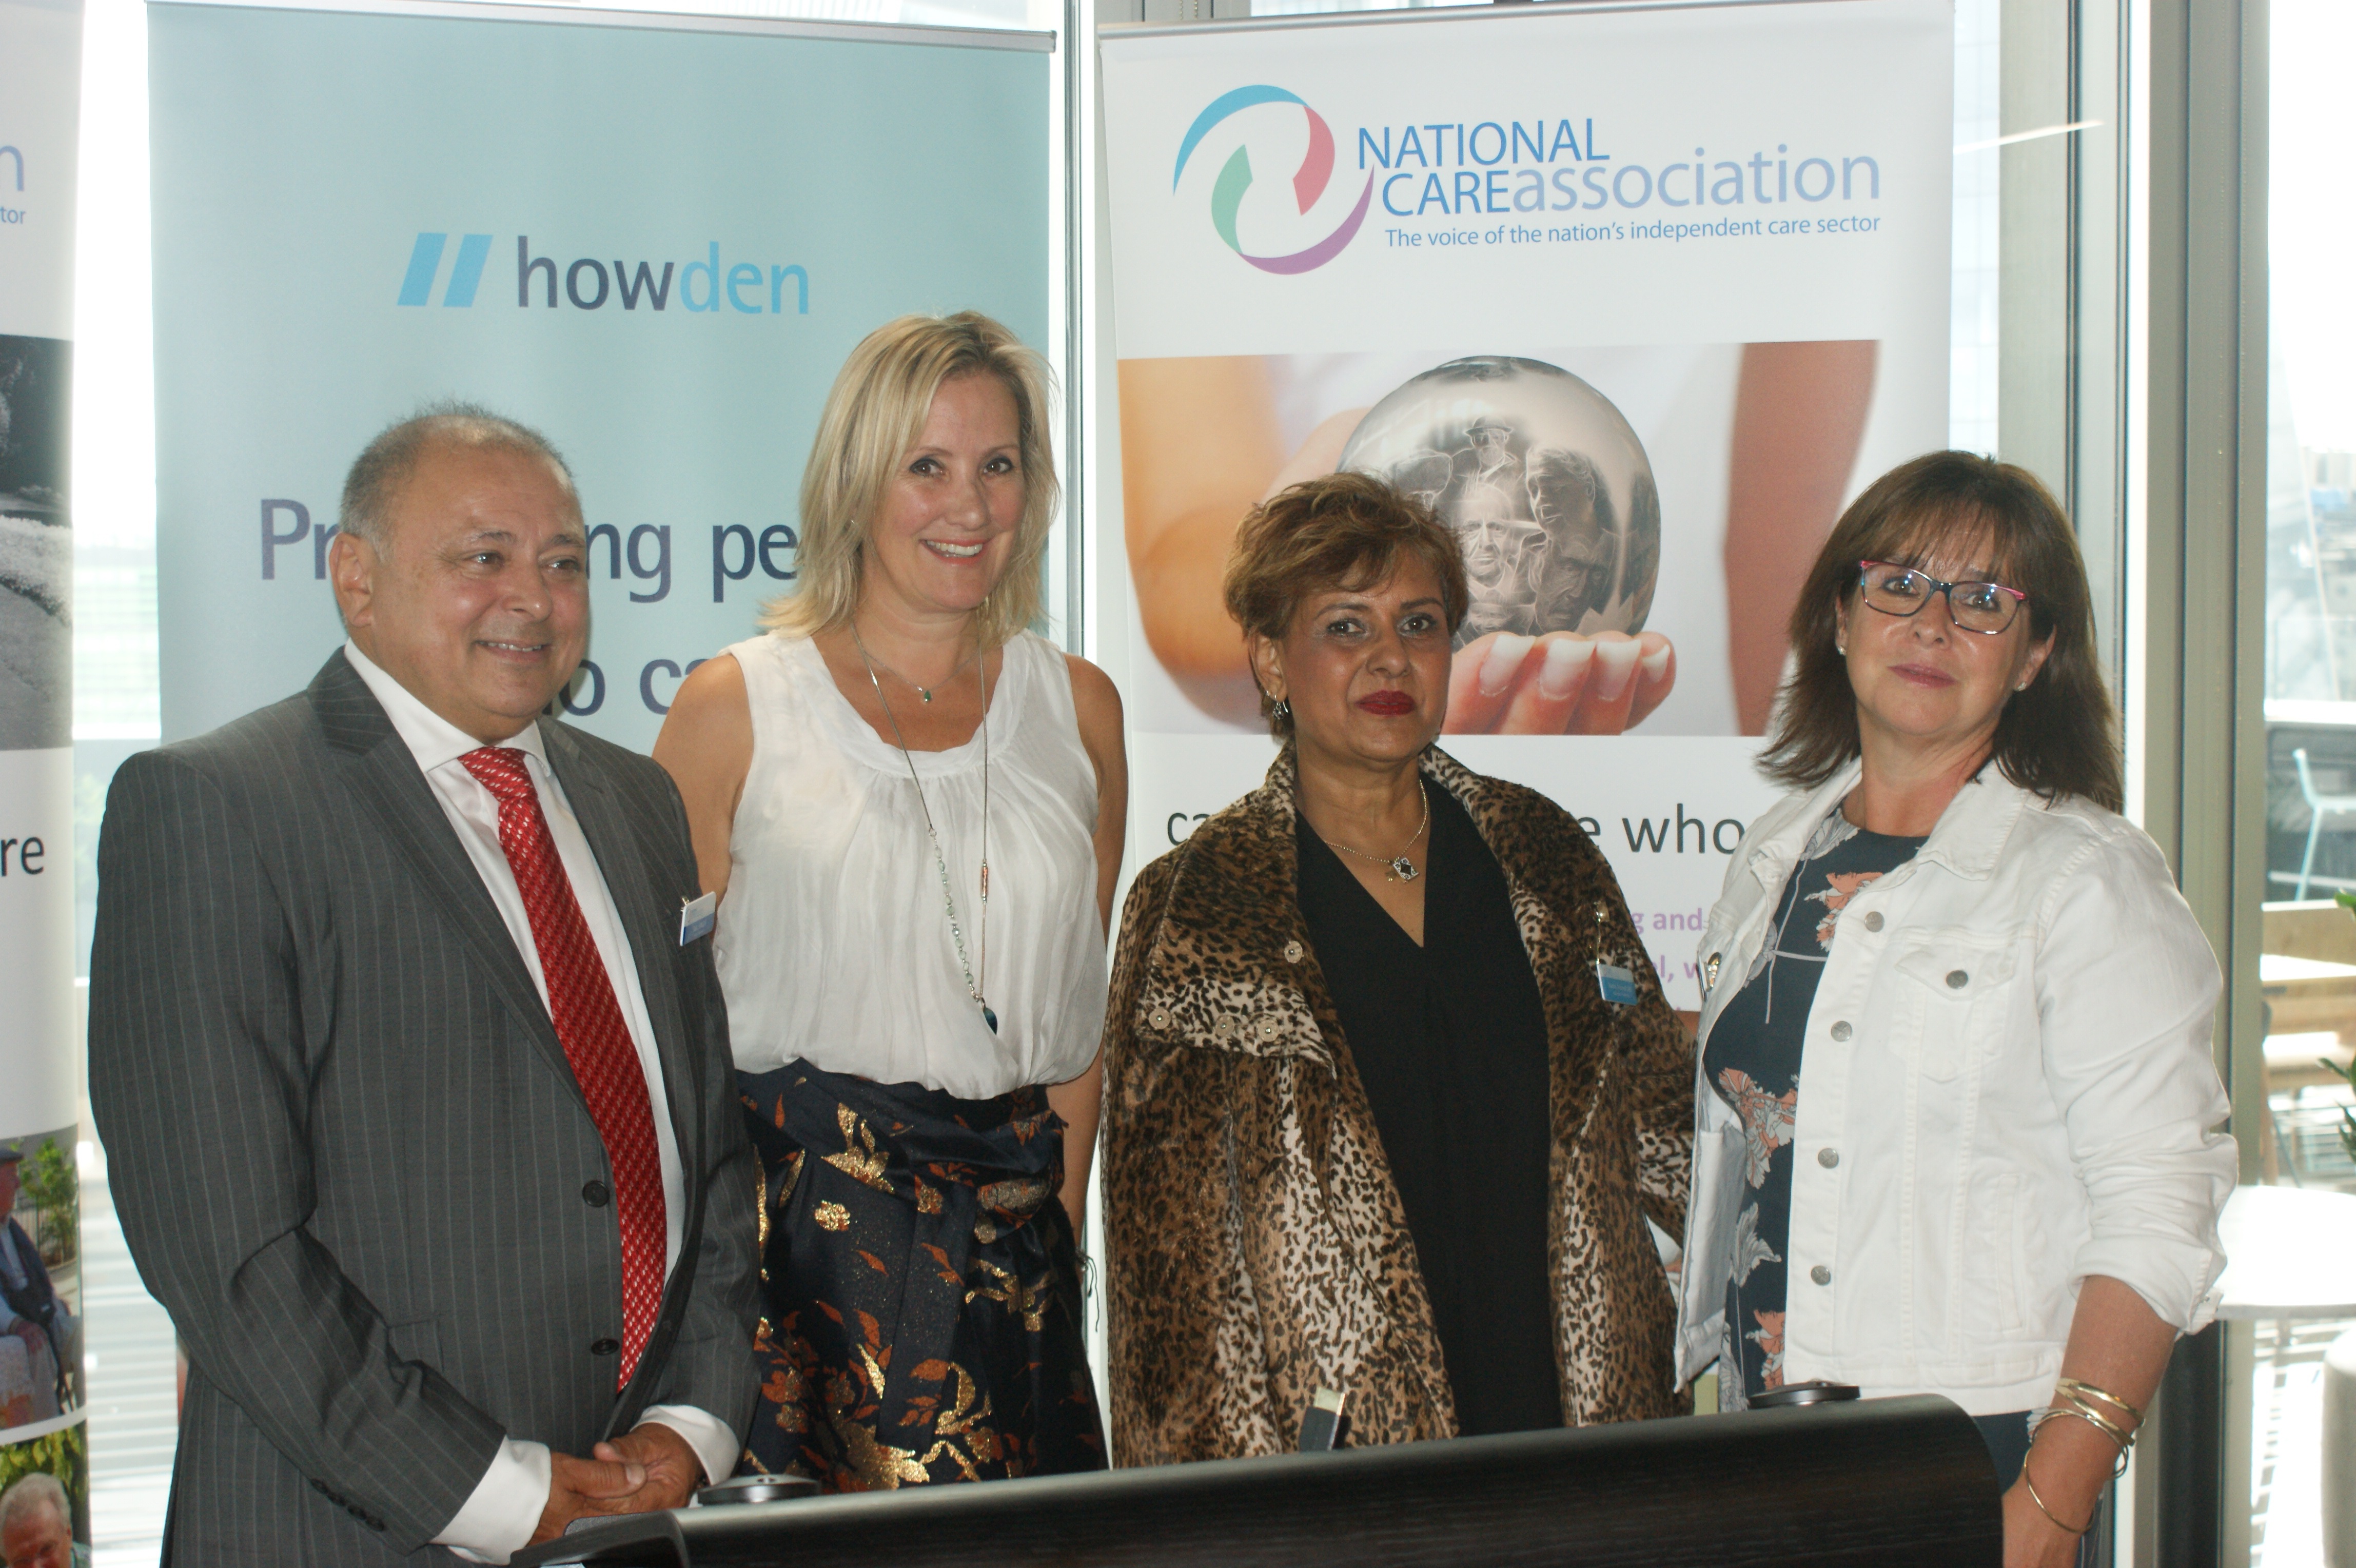 Raj Singh – Vice Chairman and Treasurer of the National Care Association Caroline Dinenage – Minister of State for Care Nadra Ahmed OBE – Chairman of the National Care Association Mandy Thorn MBE – Vice Chairman of the National Care Association